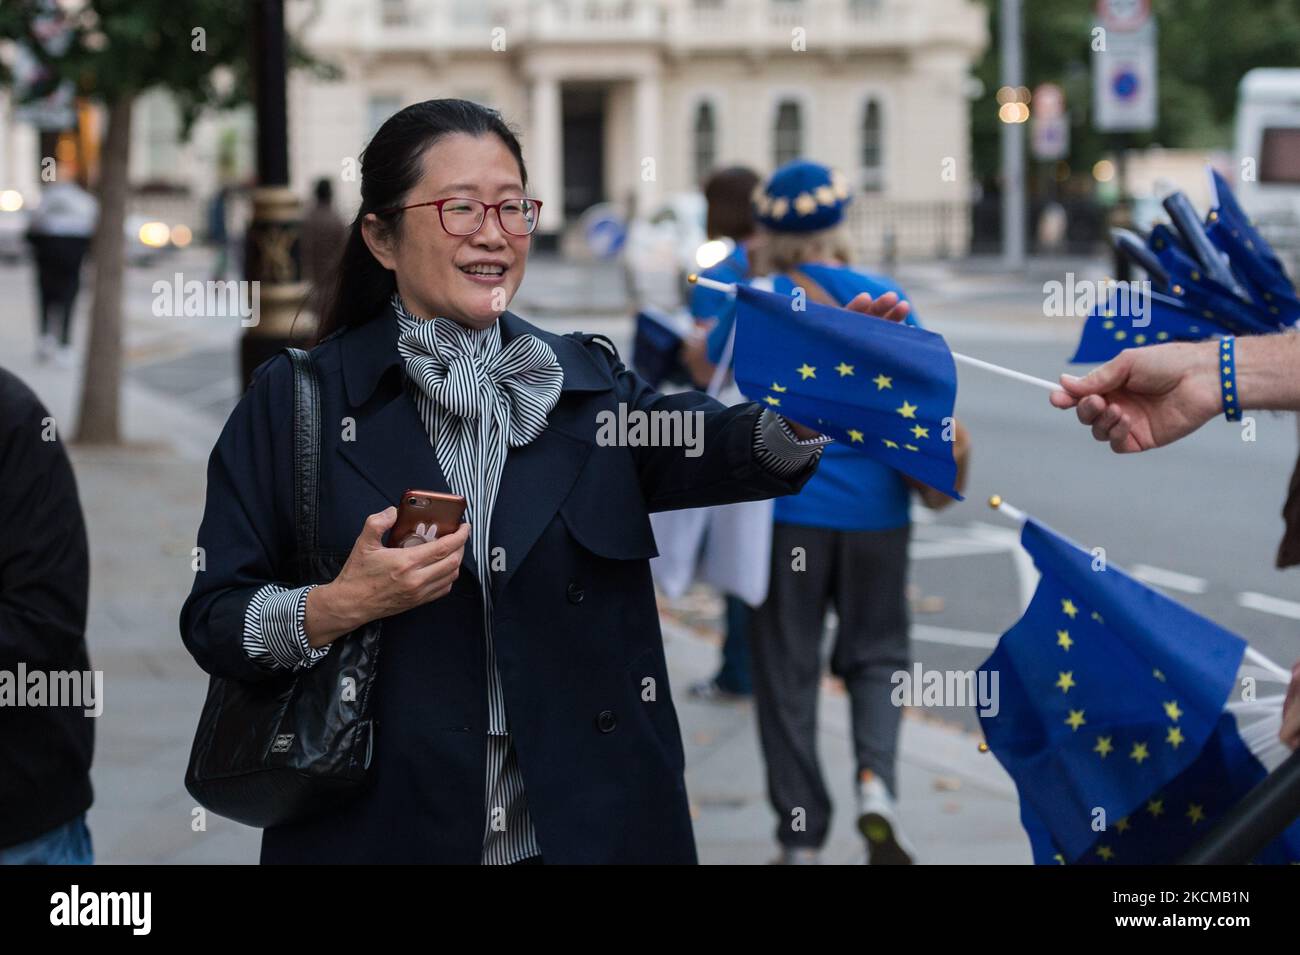 LONDON, UNITED KINGDOM - SEPTEMBER 11, 2021: Pro-EU activists hand out flags to concert-goers outside Royal Albert Hall ahead of the Last Night of the Proms to highlight lack of post-Brexit agreement for touring arts on September 11, 2021 in London, England. The campaigners call for the government to introduce a transitional support package to cover the additional post-Brexit expenses before securing an EU-wide touring artists visa waiver. (Photo by WIktor Szymanowicz/NurPhoto) Stock Photo